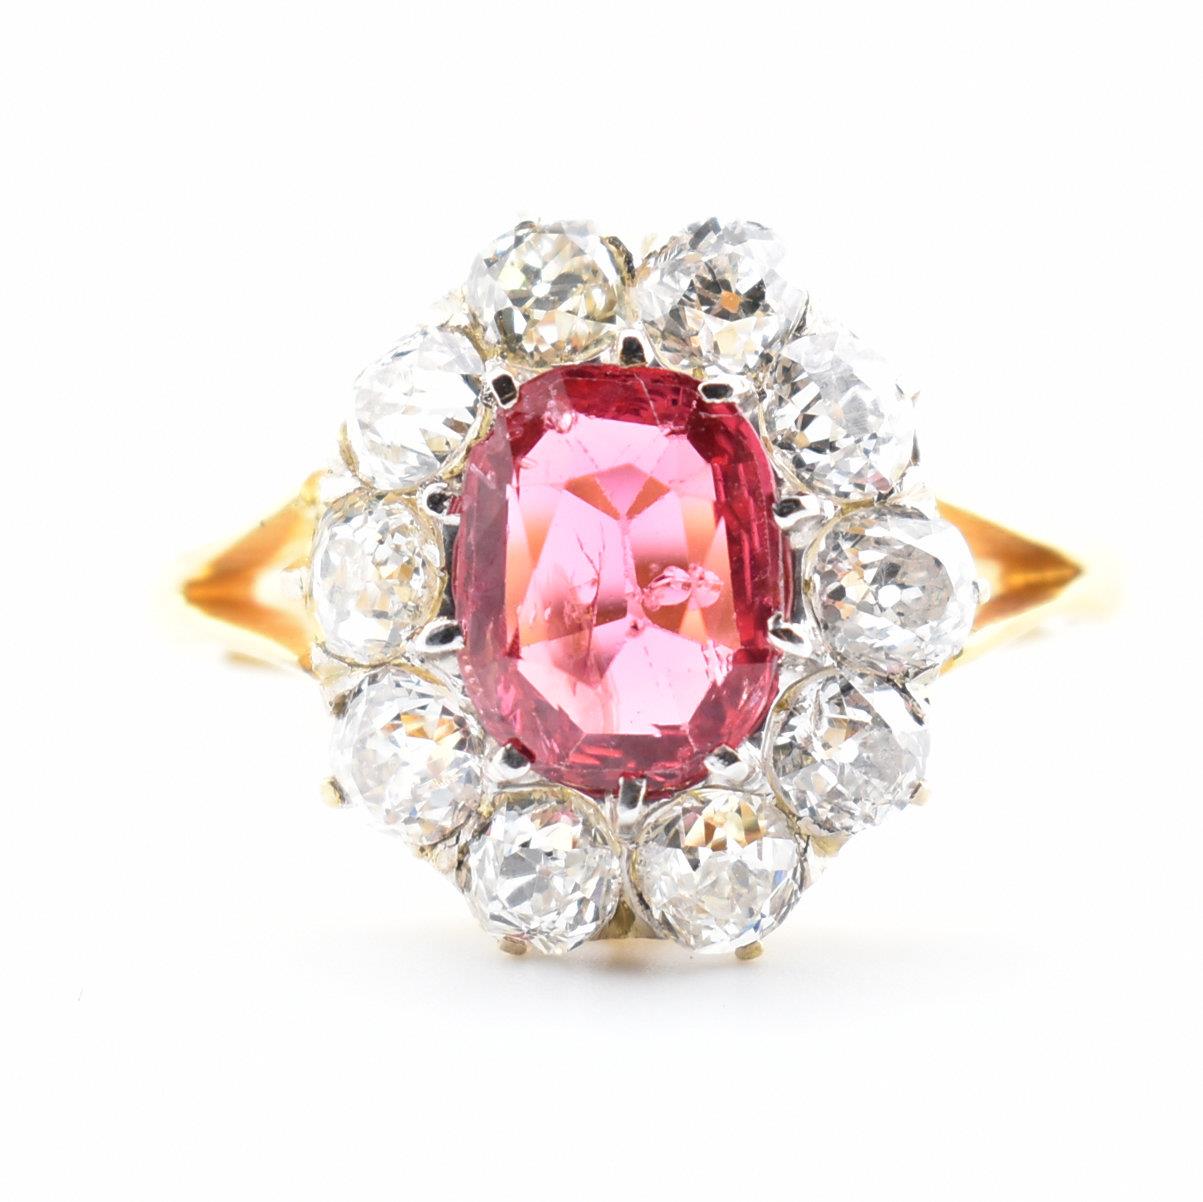 VICTORIAN RED SPINEL & DIAMOND CLUSTER RING - Image 6 of 8